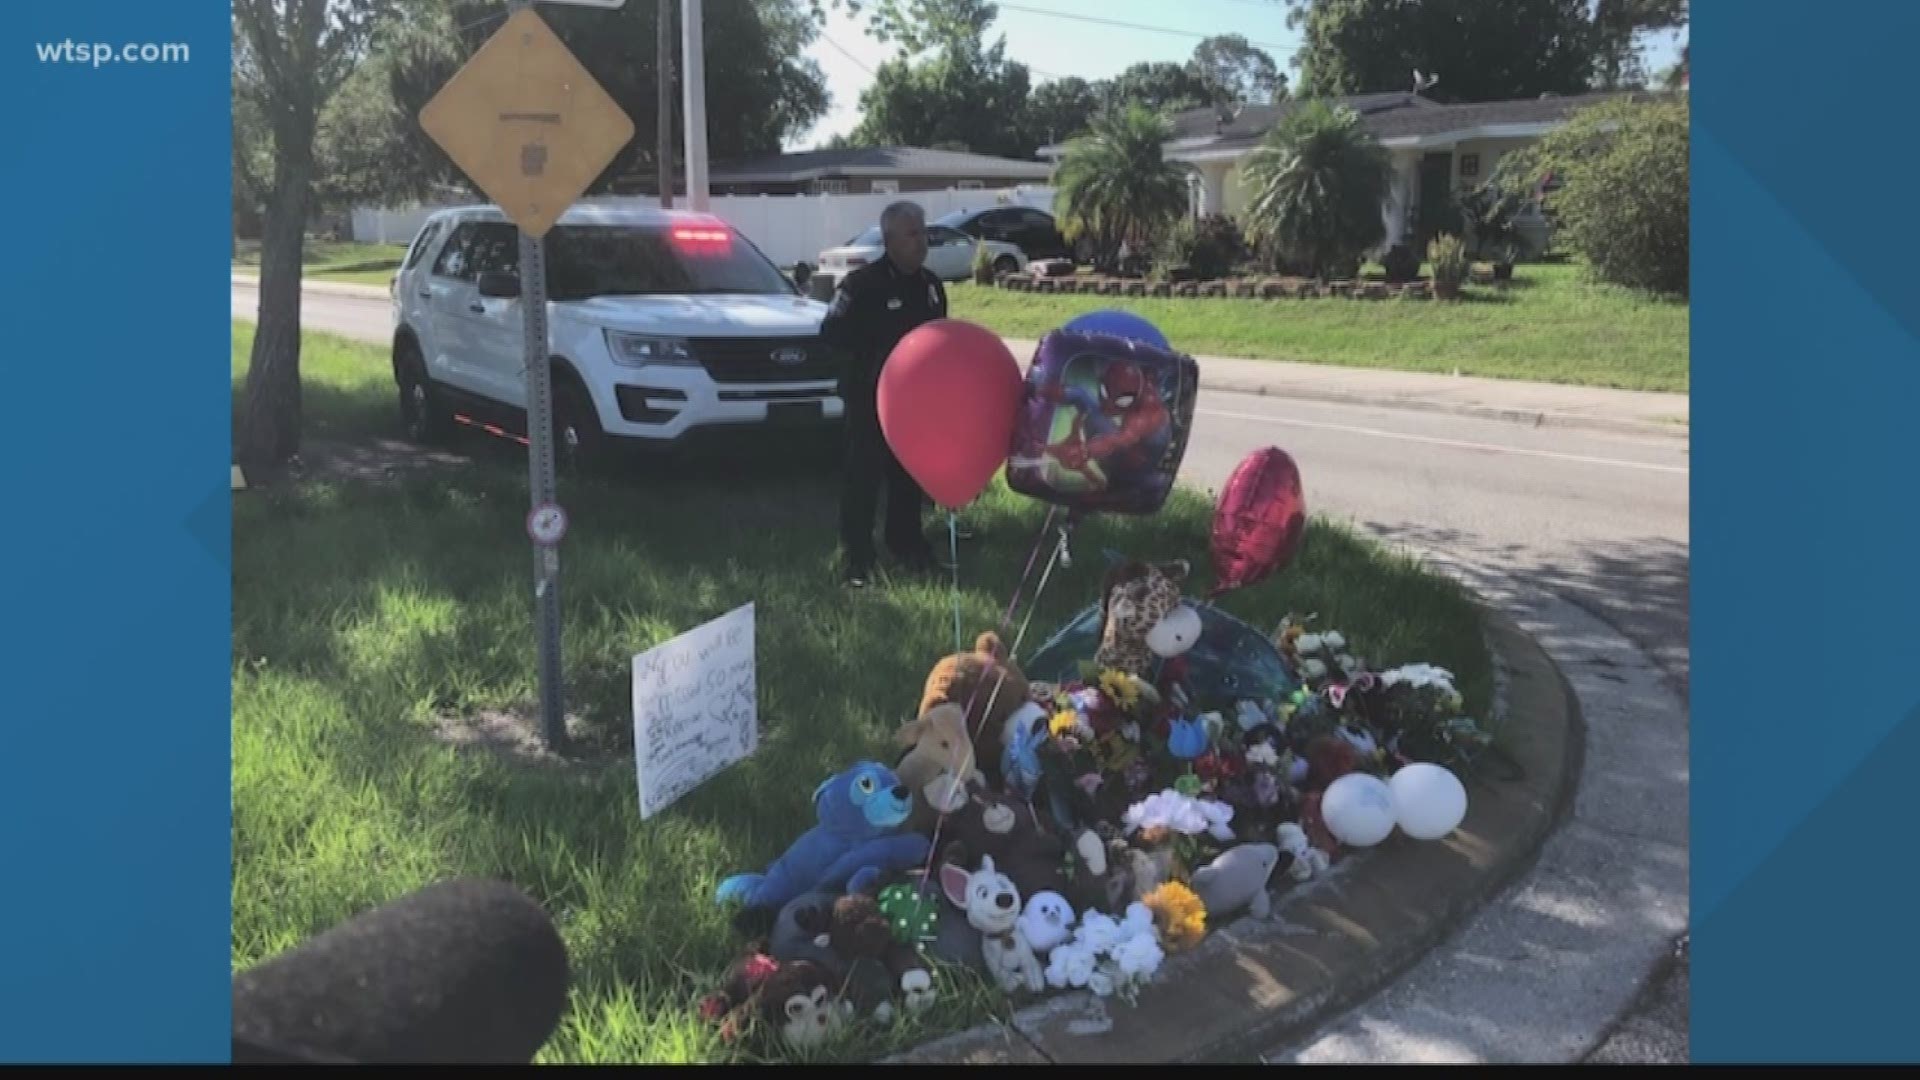 A 9-year-old boy died after he was hit by a pickup truck Monday morning.

Roman Miller, of Sarasota, was struck by a black Chevy Silverado at 7:48 a.m. at the intersection of Nodosa Drive and Webber Street in Sarasota Springs, according to Florida Highway Patrol.

A 25-year-old Sarasota woman was driving the pickup truck north on Nodosa Drive when she hit Miller, who was in the crosswalk. The driver has been identified as Charity Lamb.

“When you are in the crosswalk, you have the right of way. So that vehicle should have stayed at that point, hopefully seen both and let them pass through,” said State Trooper Kenny Watson. 

Unfortunately, troopers say the driver did not. However, investigators say she is cooperating with them. She told investigators she only saw Roman’s older sister, a fifth-grader, who was leading the way for her little brother.

The sister made it through the crosswalk before her brother was hit. The truck dragged the boy about 15 feet, according to an FHP spokesperson.

“Unfortunately, she heard everything. And then she would have immediately turned around and gone to her brother’s aid. And, I cannot imagine what it’s like for anyone to watch their sibling, lying on the ground after being struck by a motor vehicle,” said Watson.

Lamb has had previous driving-related citations. According to public records, she has been caught speeding, driving with a suspended license and failing to stop at a stop sign.

Neighbors say this isn’t the first time an accident has happened on this corner.

“My daughter has hit a kid on a bike, right here at this intersection, years ago. It was pouring down rain and she never even seen him. Luckily he didn’t get hurt so this is not the first accident, but it’s the worst accident,” said resident Margaret Davis. She was one of the first people on the scene after the accident, along with Roman’s mother.

“I cried with the mother. When I walked out, the mother, I cried.”

A family friend, Joshua Miller, is working to help the family out. At this point, a meal exchange program has been set up and a GoFundMe is on the way. Miller says they are working on a vigil, but nothing has been set yet. 

Miller describes the family of Roman as “the best family,” and is devastated for their loss.